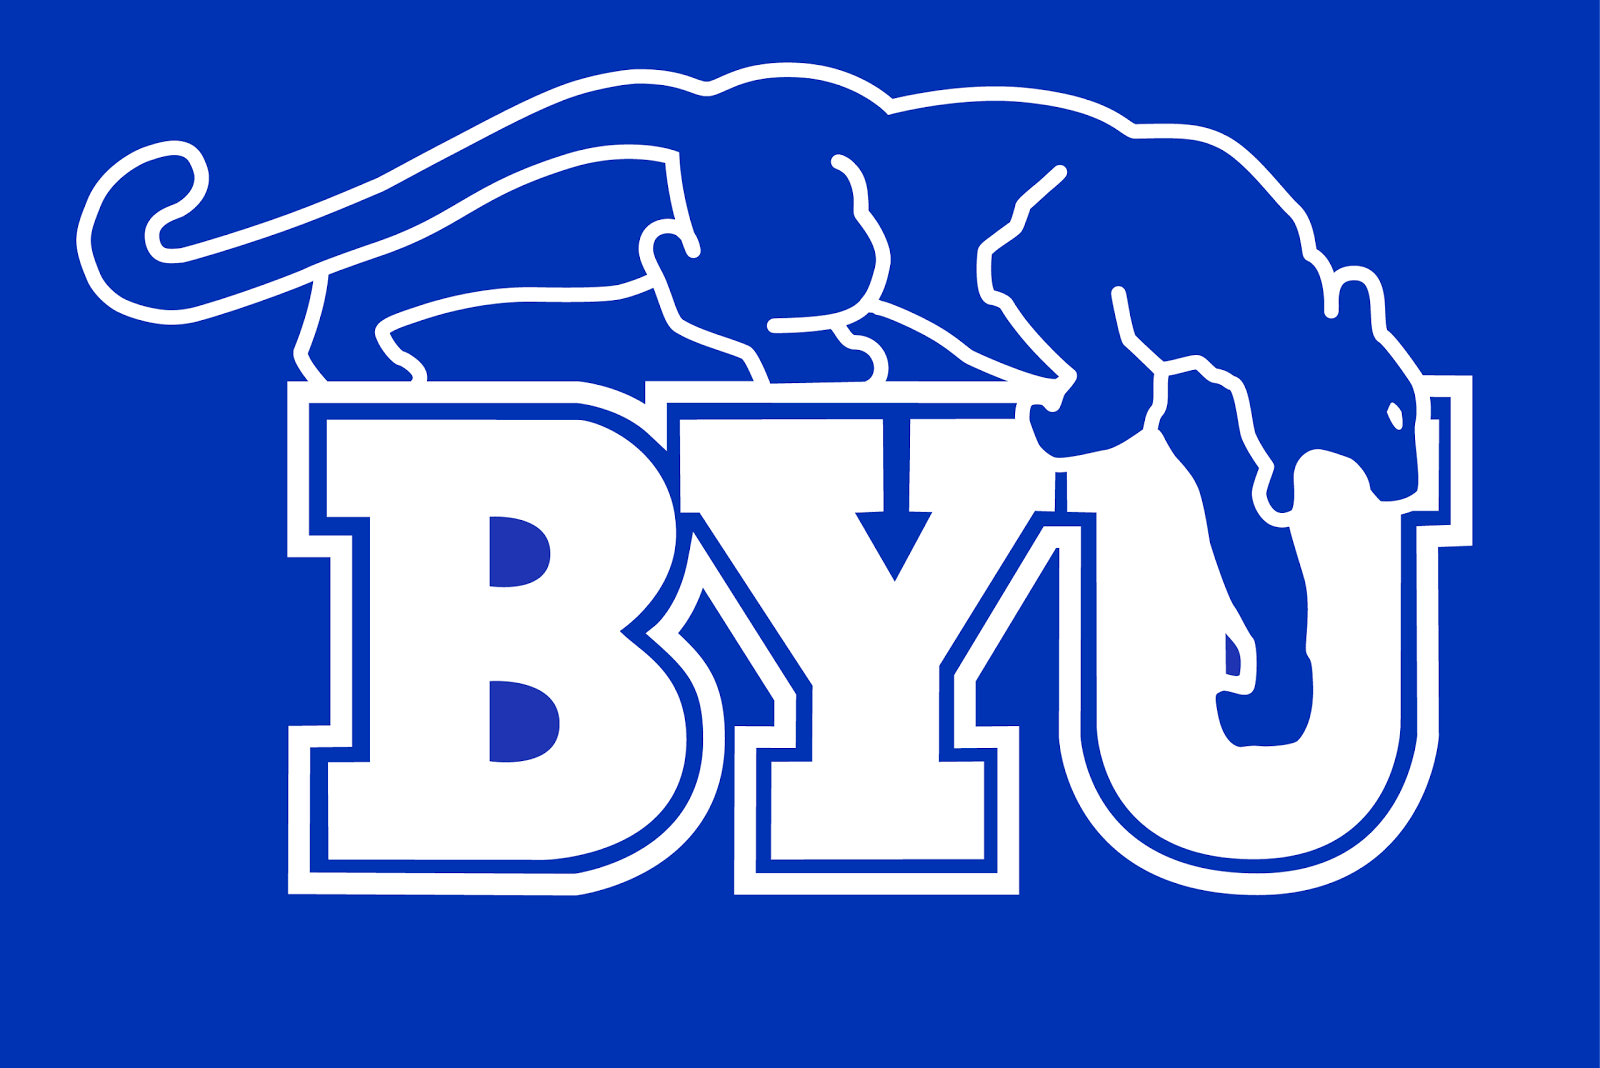 Image Byu Logo Pc Android iPhone And iPad Wallpaper